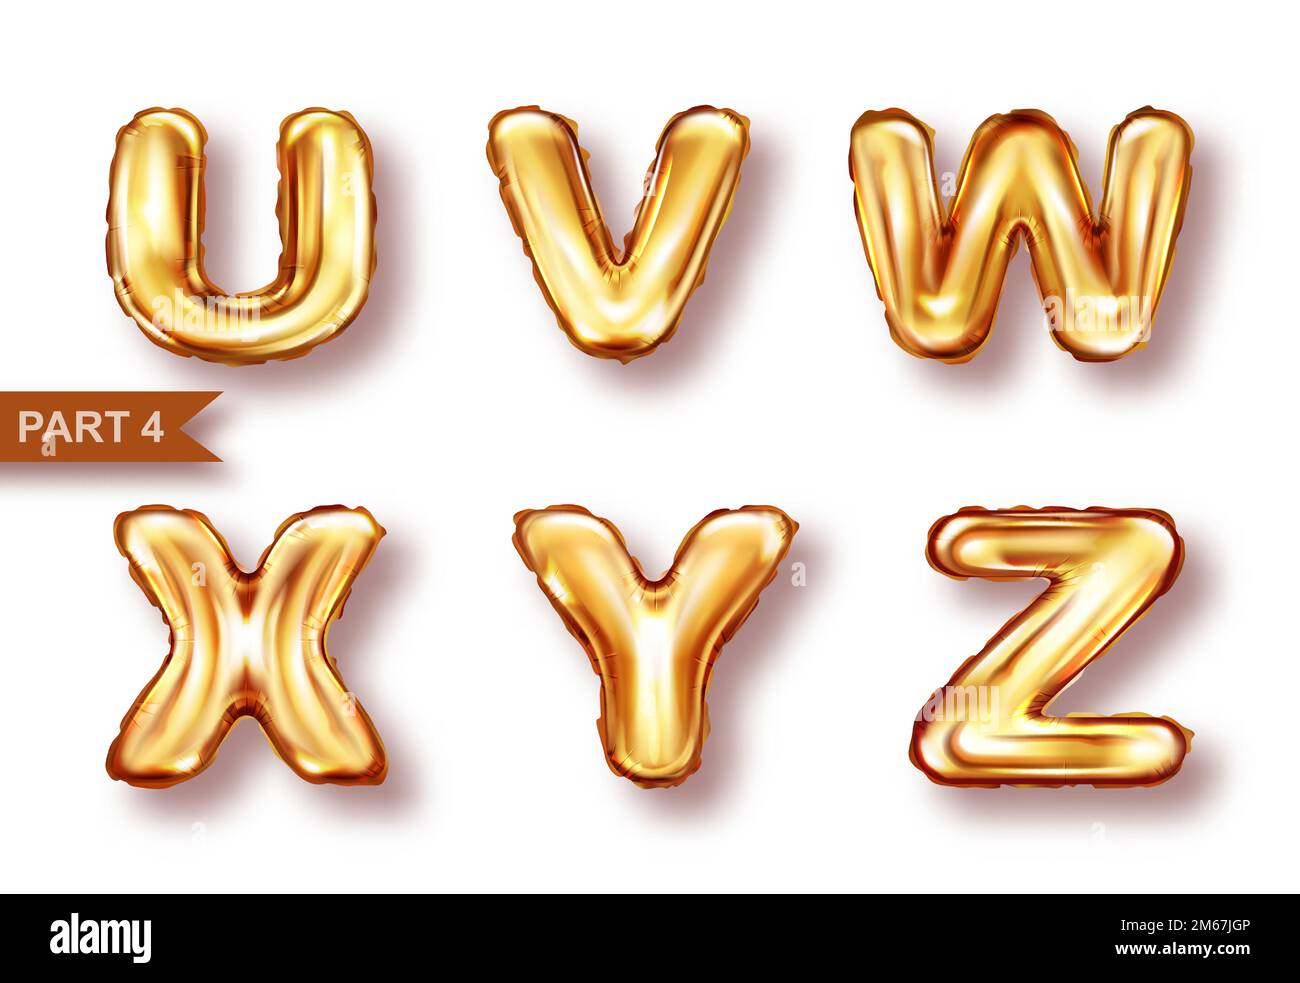 Alphabet golden balloons realistic vector. Inflatable golden letters of metal foil for childrens parties, shining font isolated on white background, part 4 Stock Vector